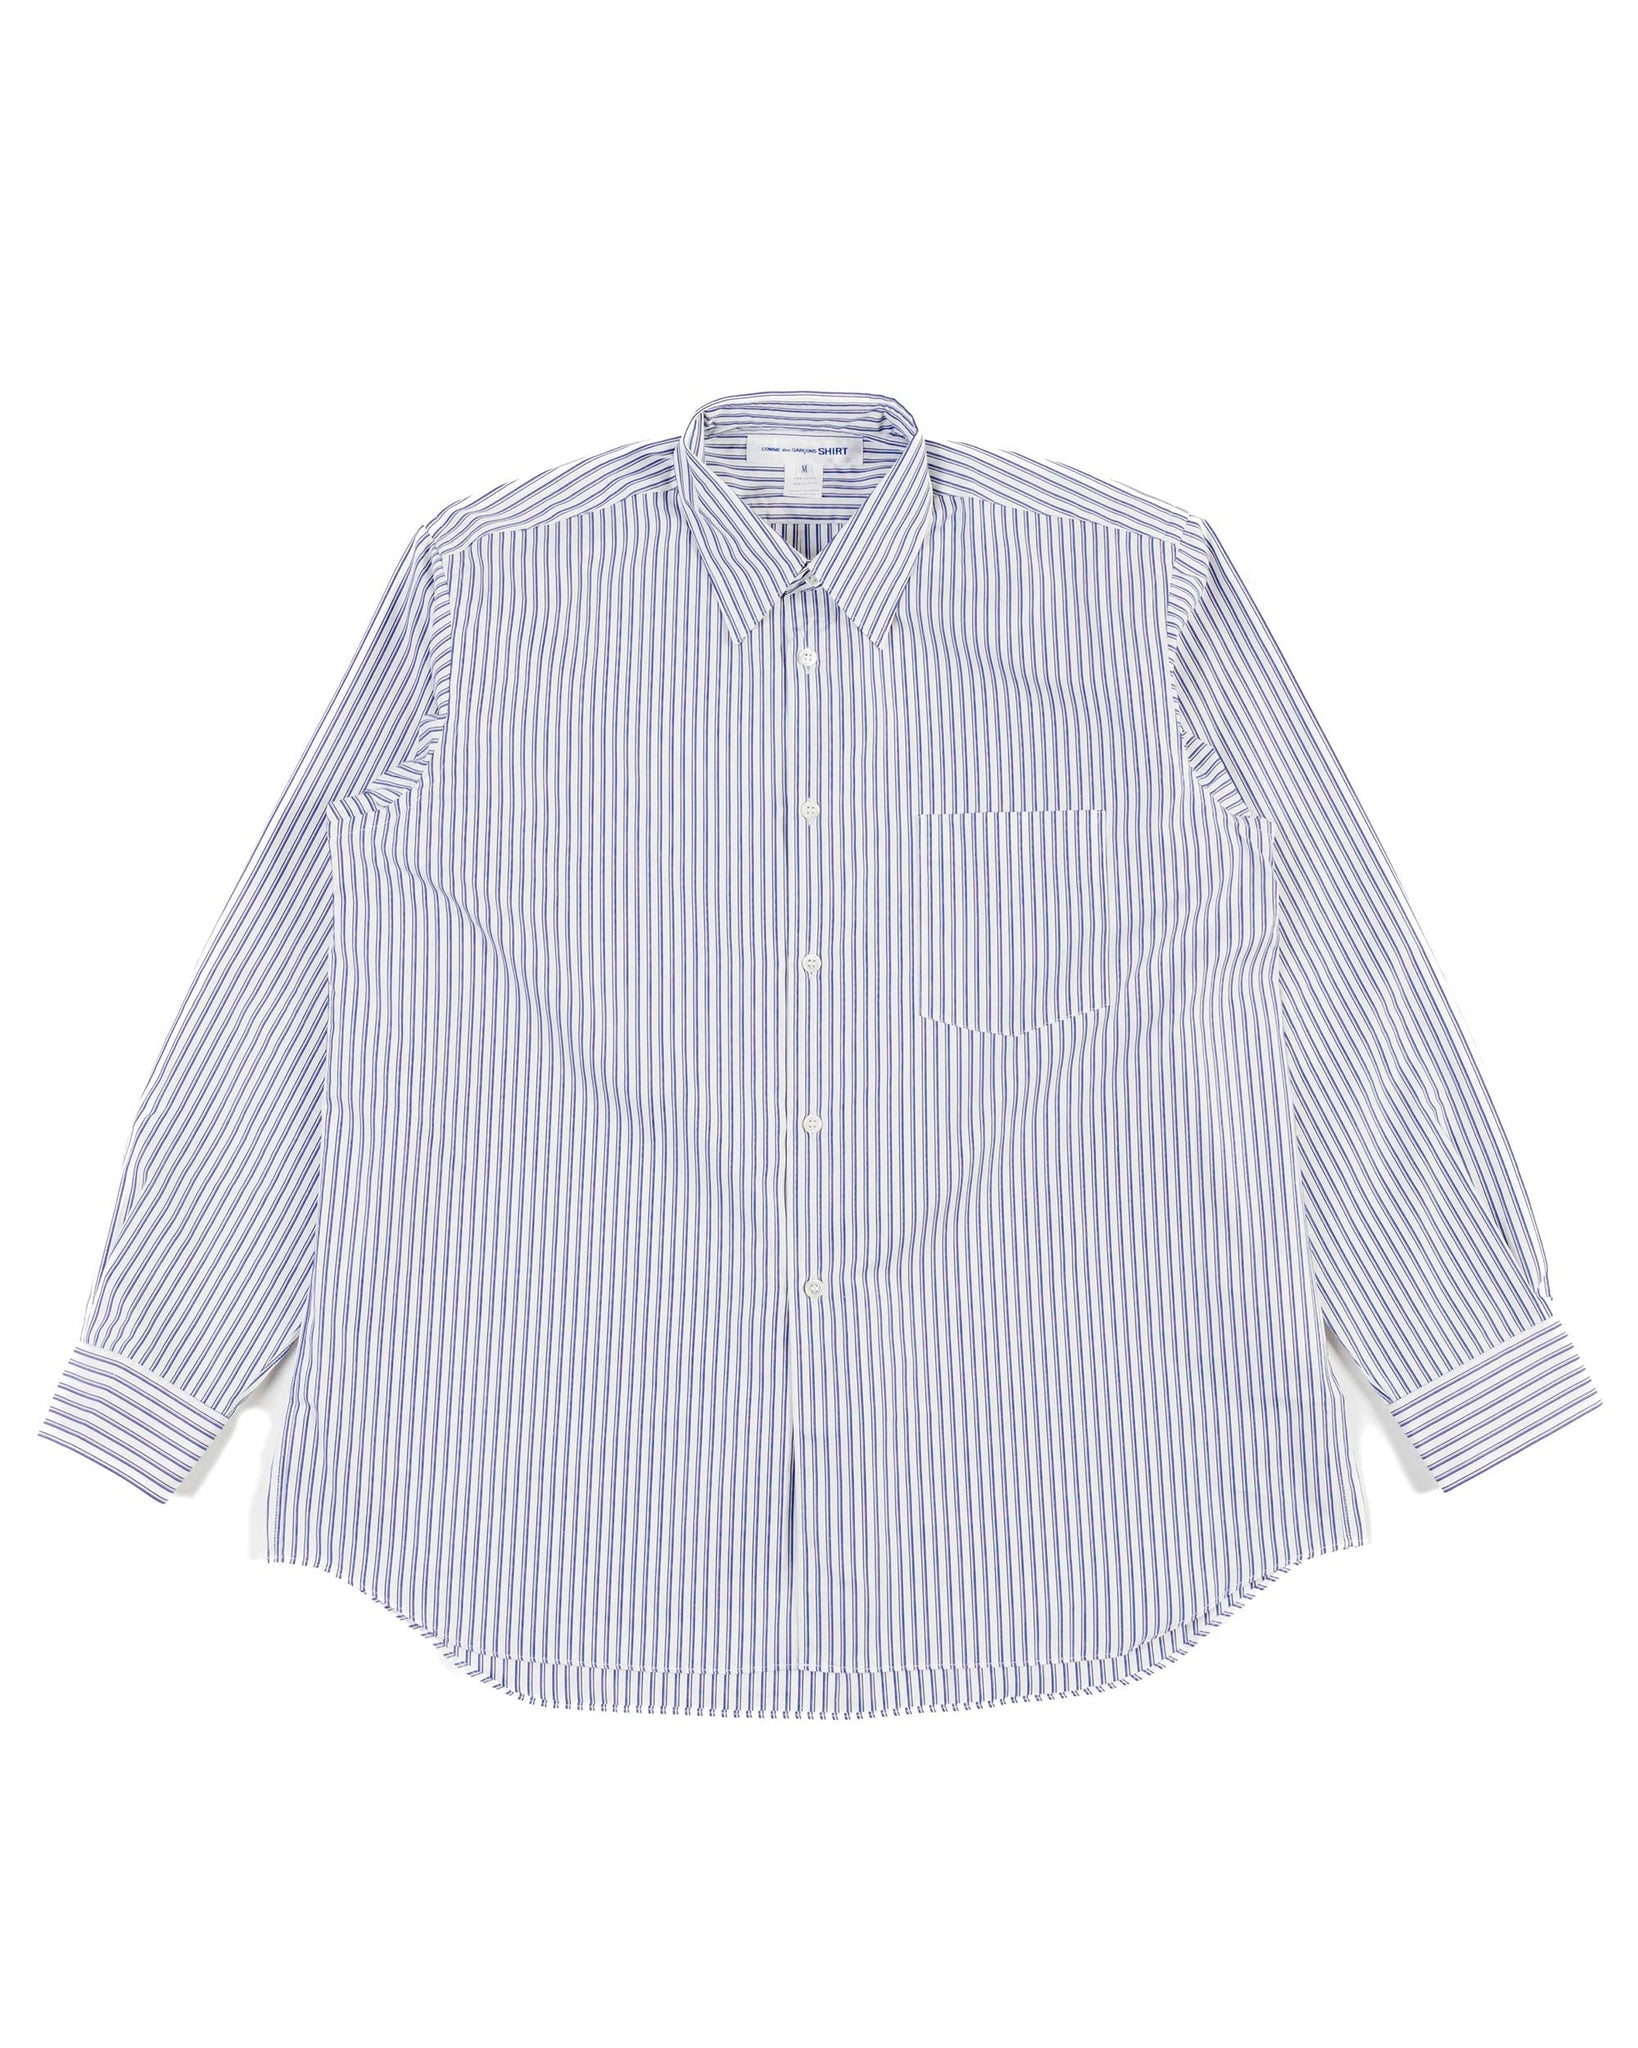 COMMEdesGARCONSCOMME des GARCONS / SHIRT パステルくるみボタンシャツ